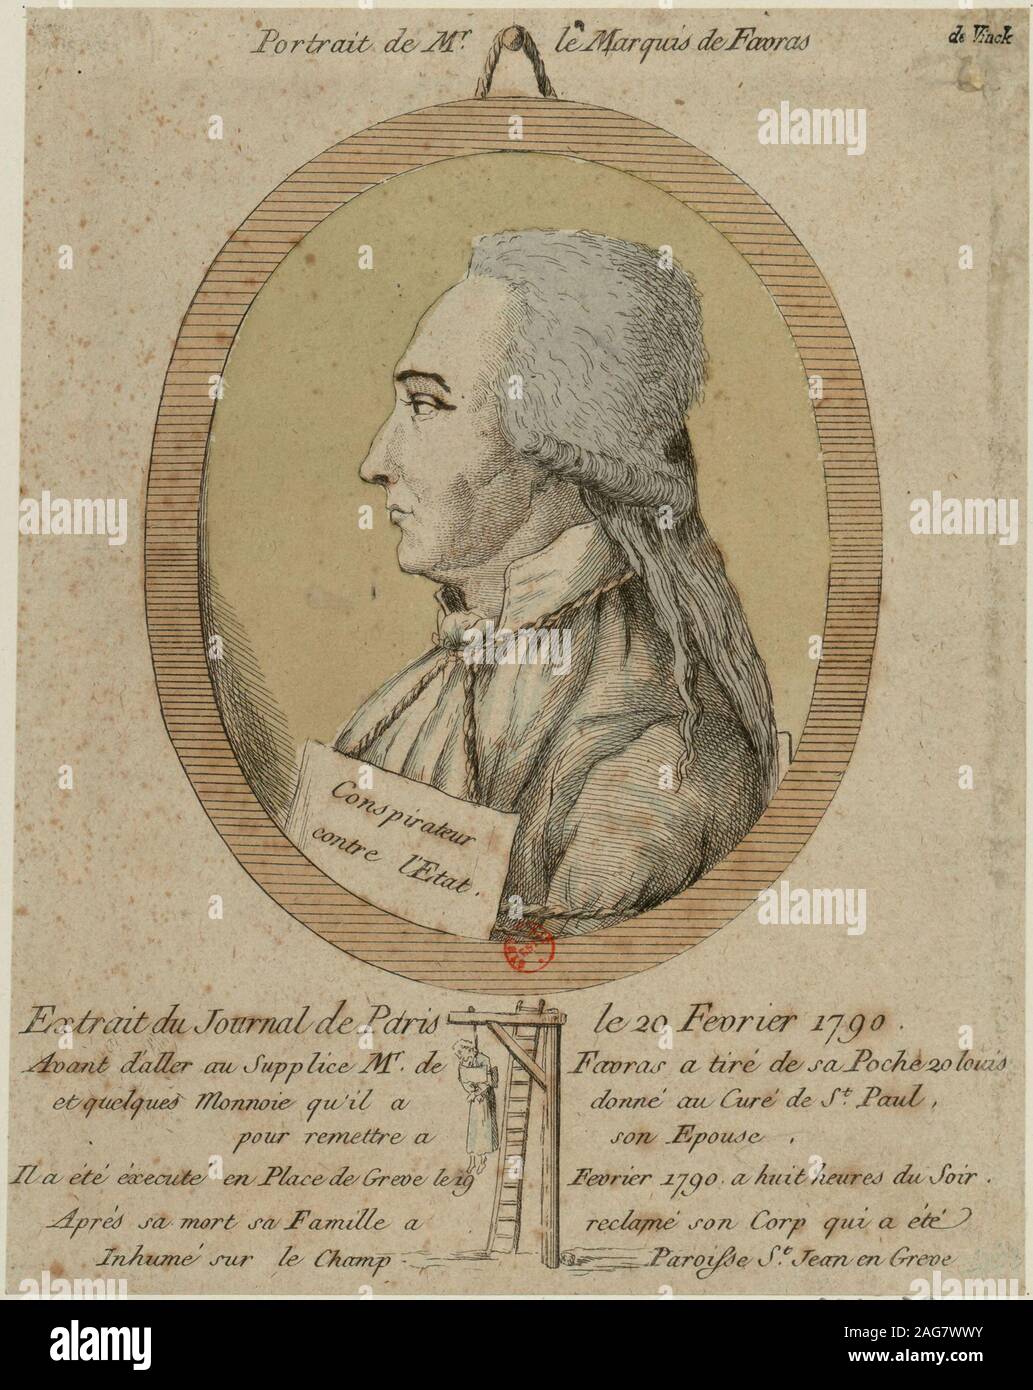 Thomas de Mahy, Marquis de Favras (1744-1790). From the Journal de Paris on  February 20, 1790, 1790. Found in the Collection of Biblioth&#xe8;que  Nationale de France Stock Photo - Alamy